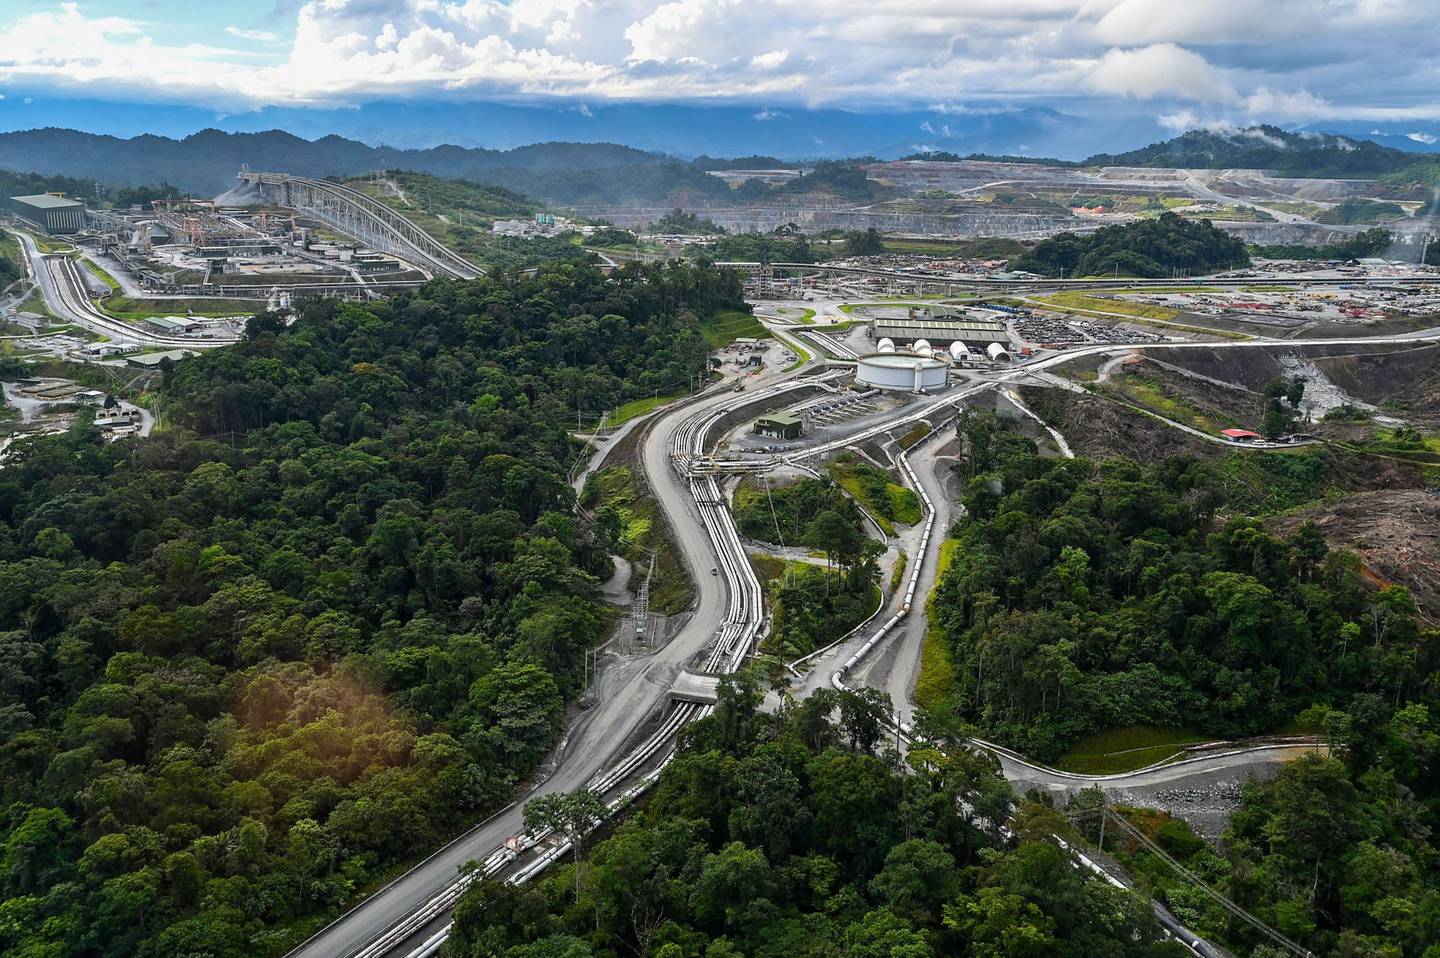 The Cobre Panama mine. Photographer: Luis Acosta/AFP/Getty Images